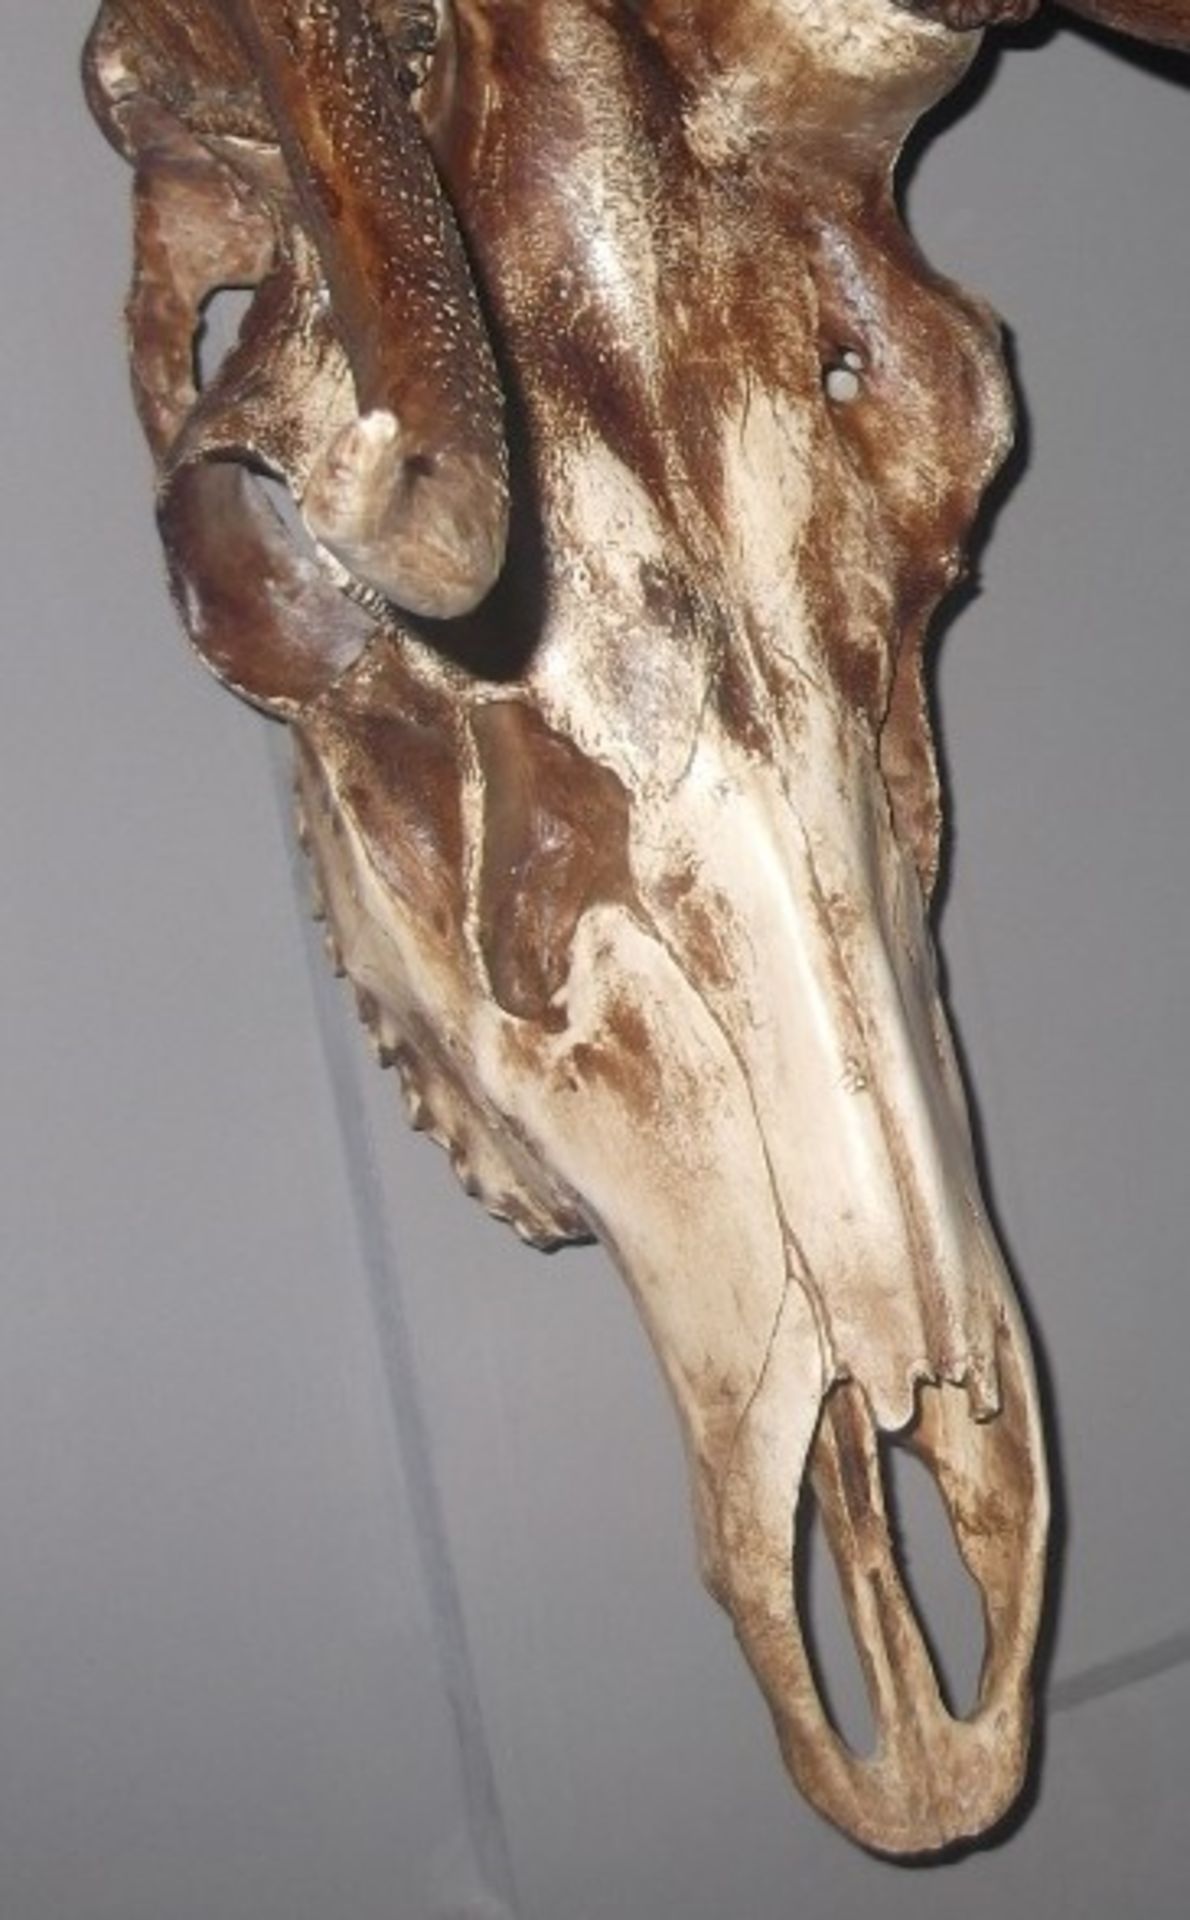 1 x Trophy Deer Skull Wall - Art Decoration - New / Unsuesd Stock - Very Realistic Faux Reproduction - Image 3 of 4